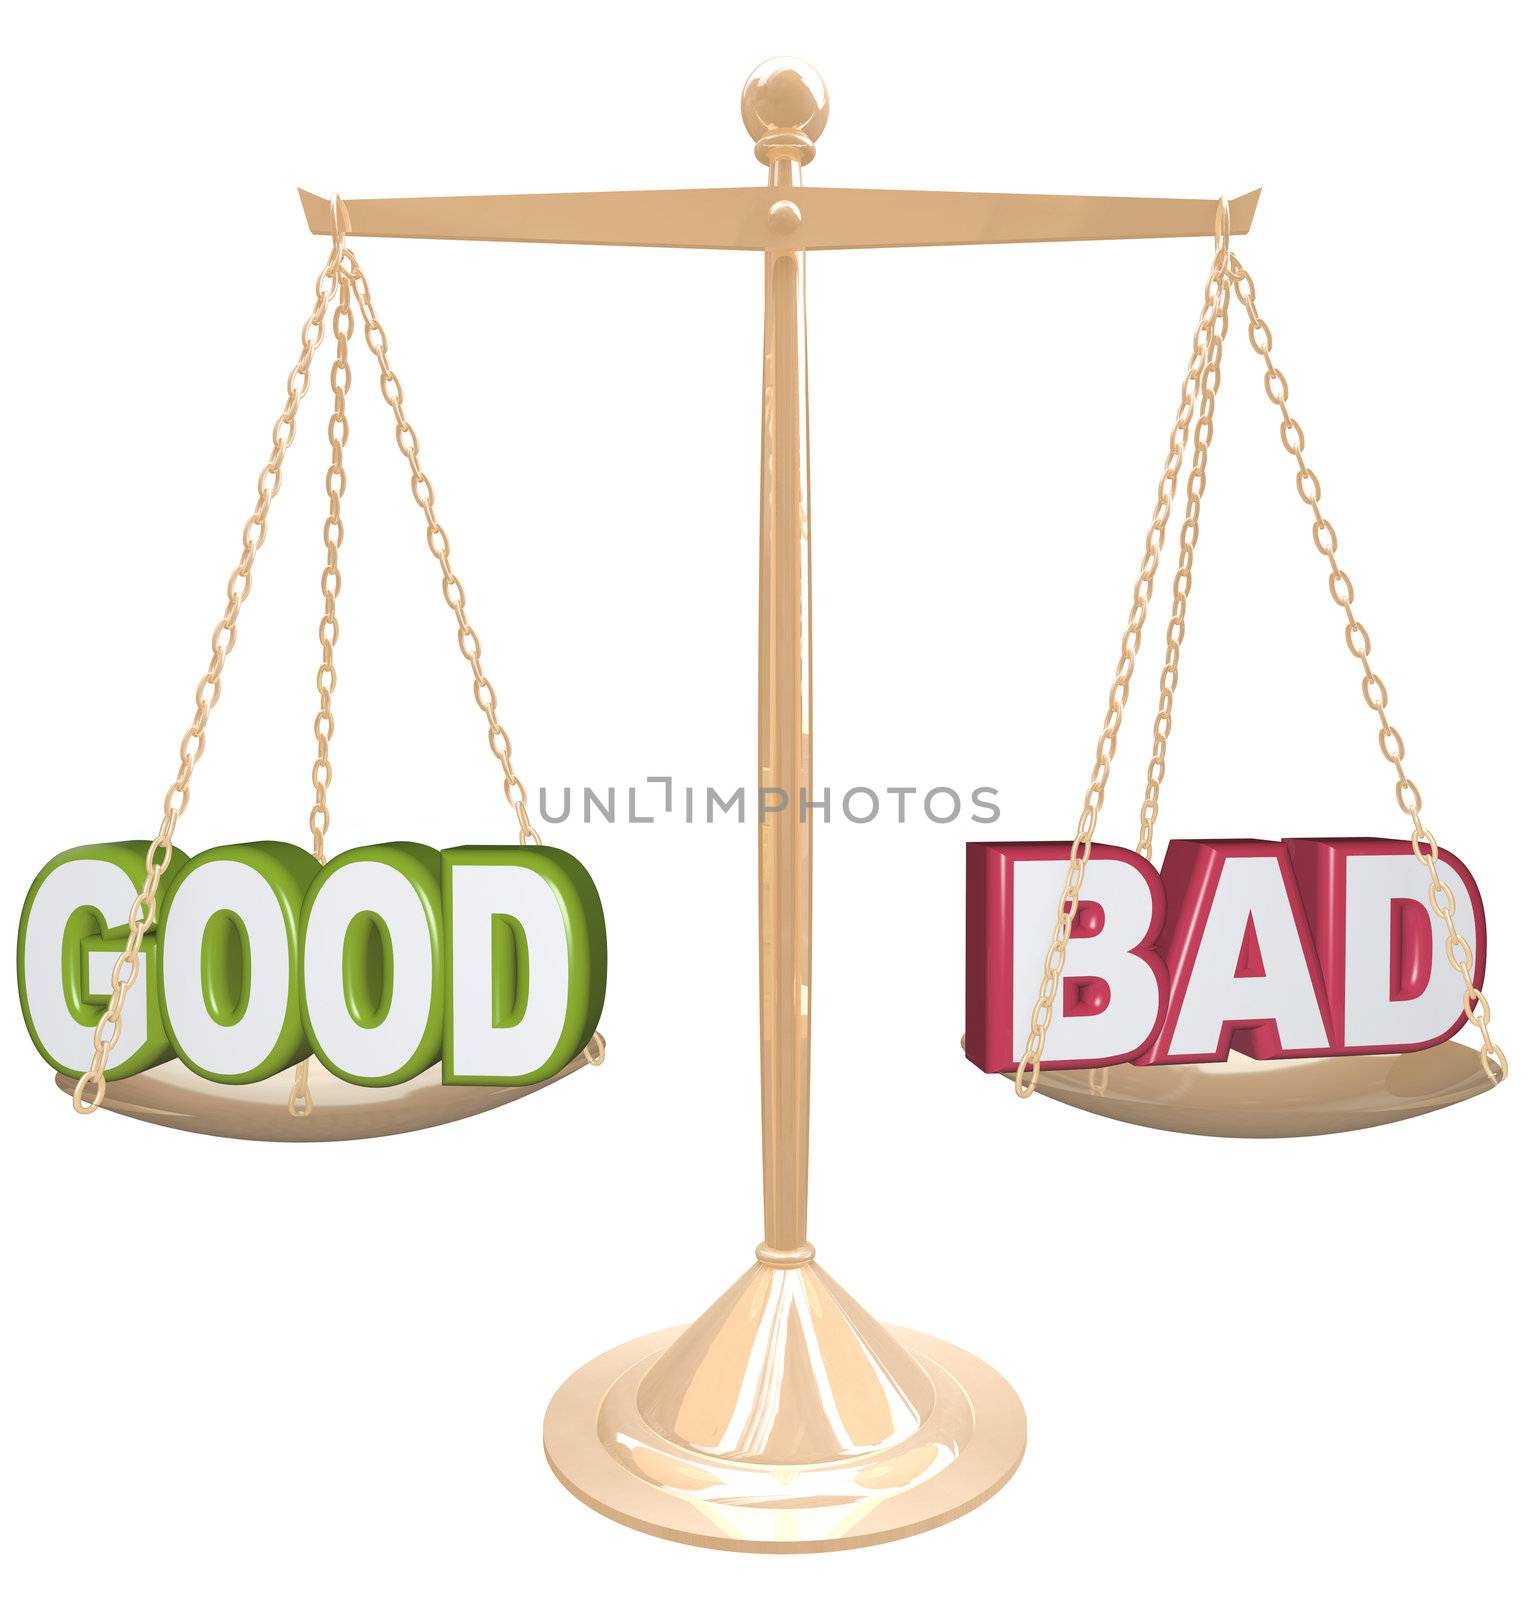 Weighing the good and bad of a situation or issue on a gold metal scale, one word on each side, measuring the positives and negatives